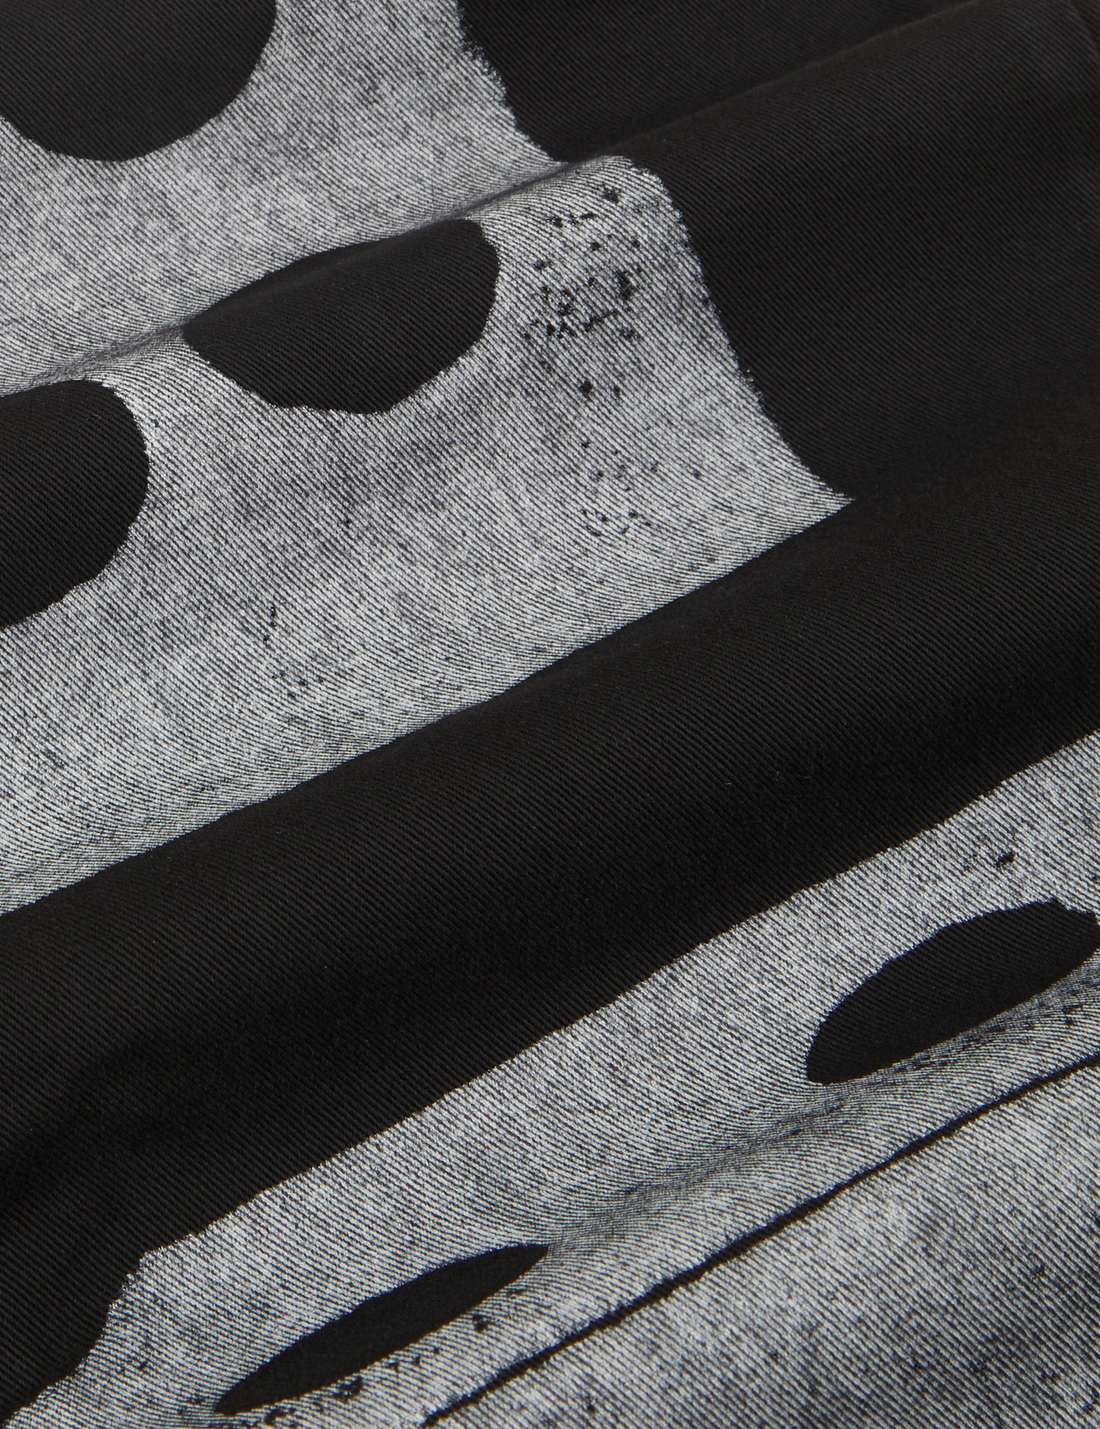 Fabric detail close up of Icon Work Pants in Dice. Large white dice paintstamped onto black Work Pants.